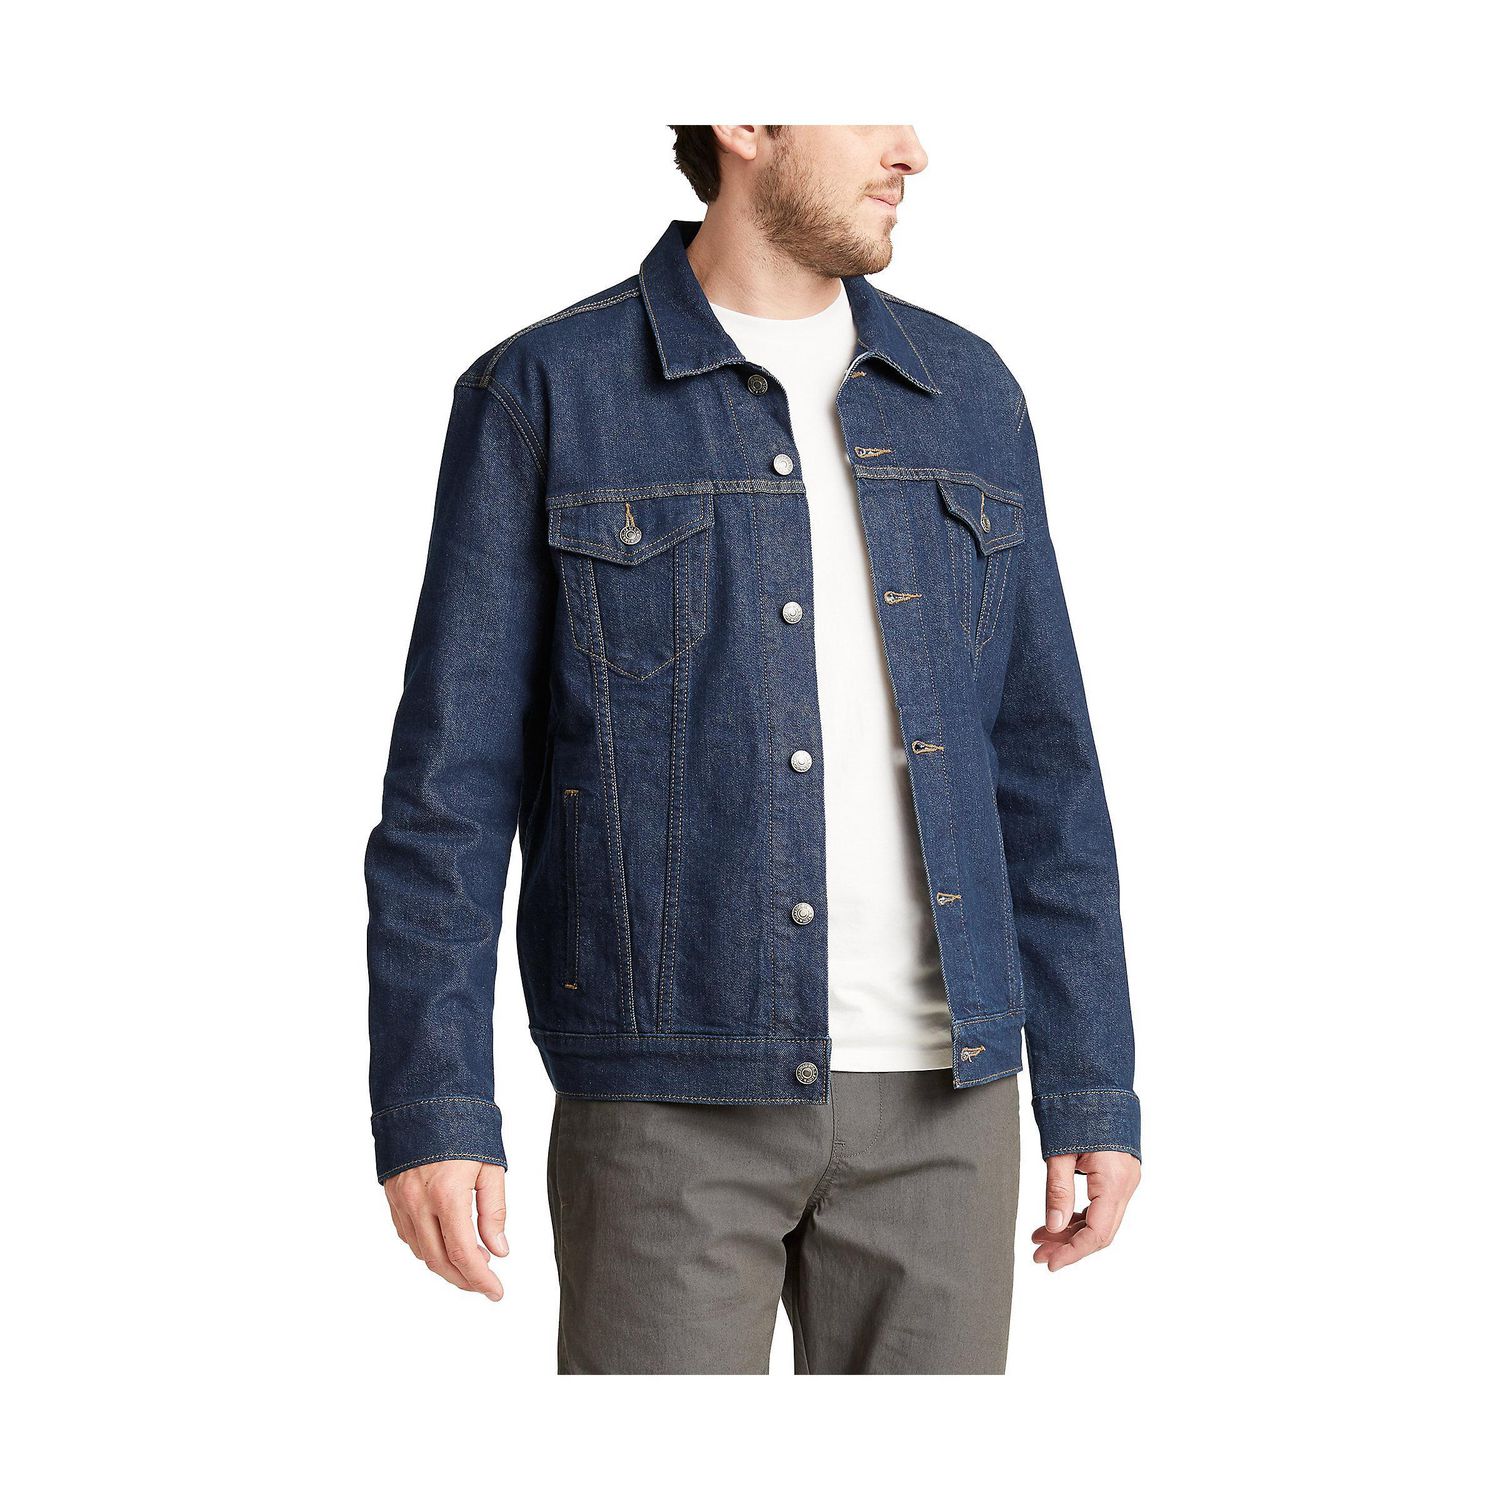 Levi's Men's Hybrid Hoodie Trucker Jacket, Candy Man, X-Small at Amazon  Men's Clothing store